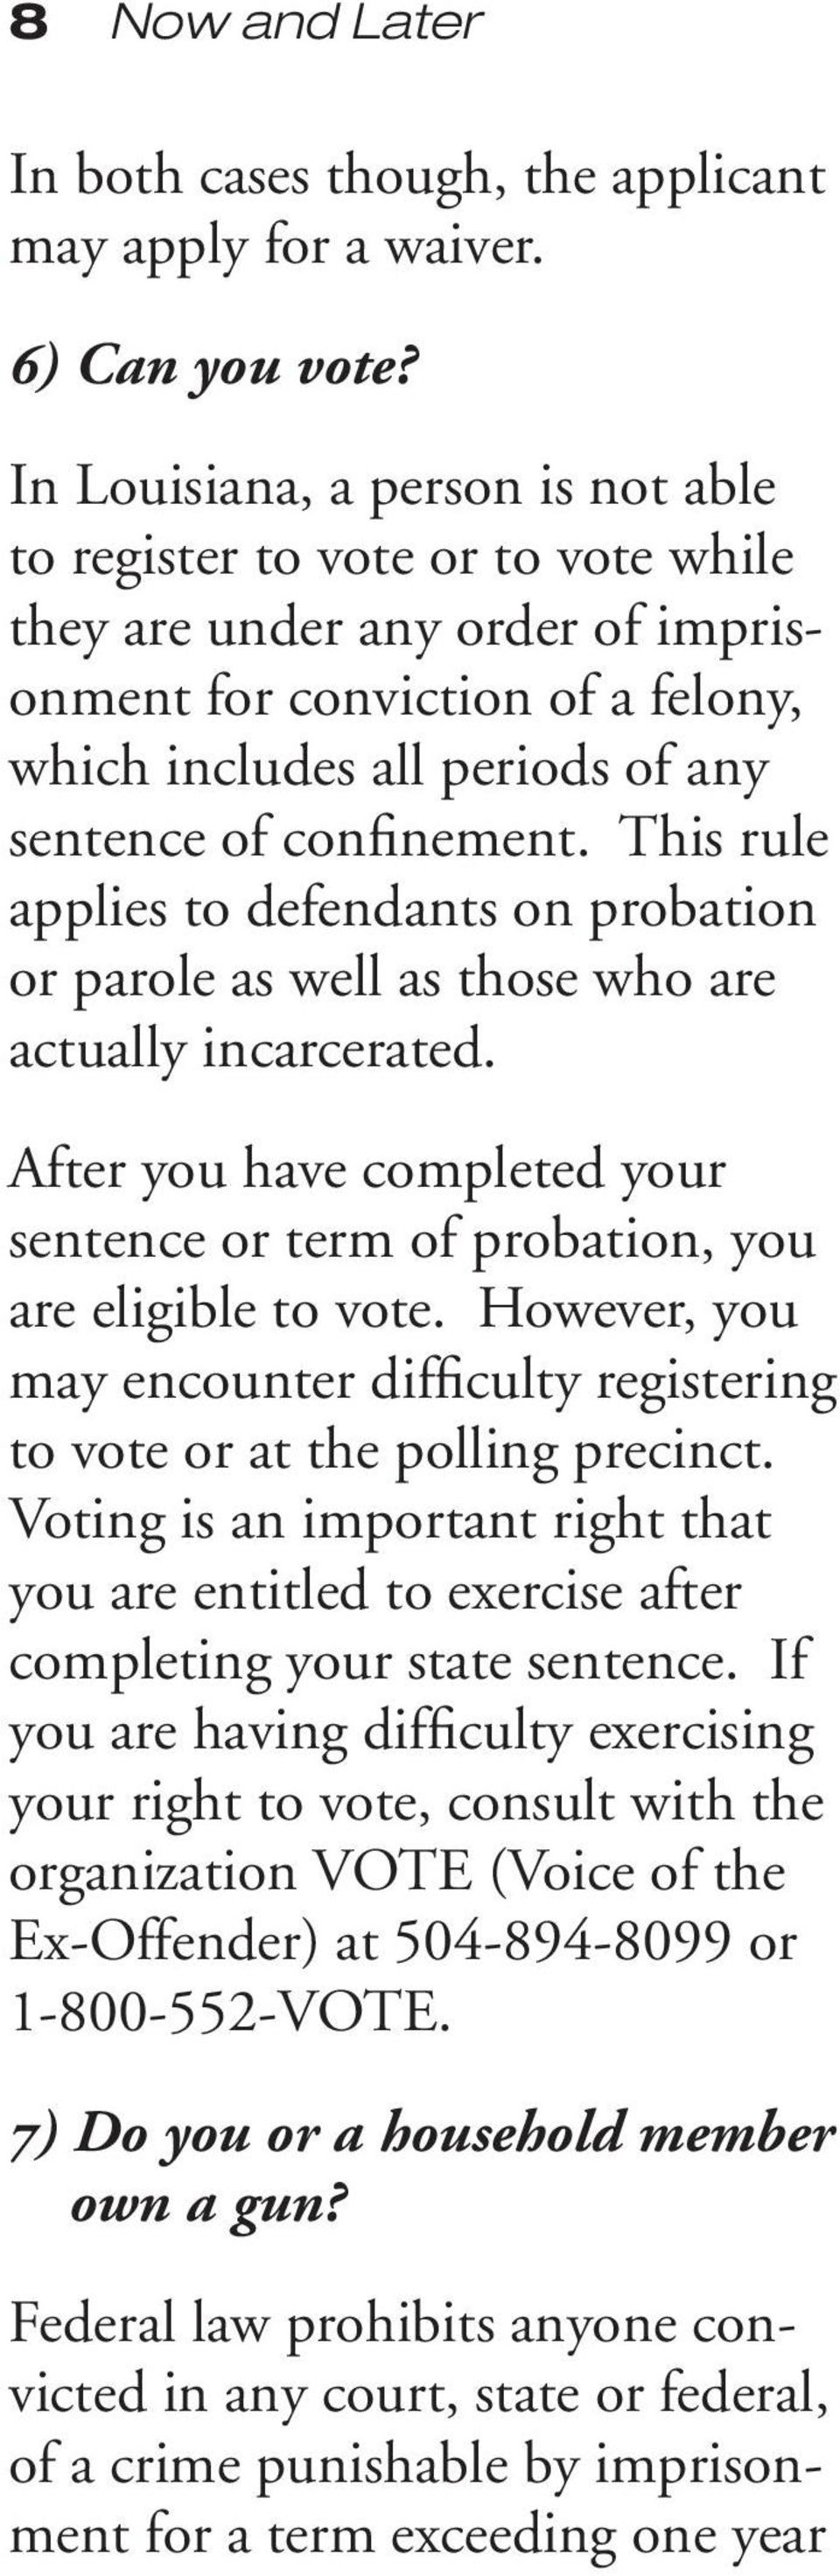 This rule applies to defendants on probation or parole as well as those who are actually incarcerated. After you have completed your sentence or term of probation, you are eligible to vote.